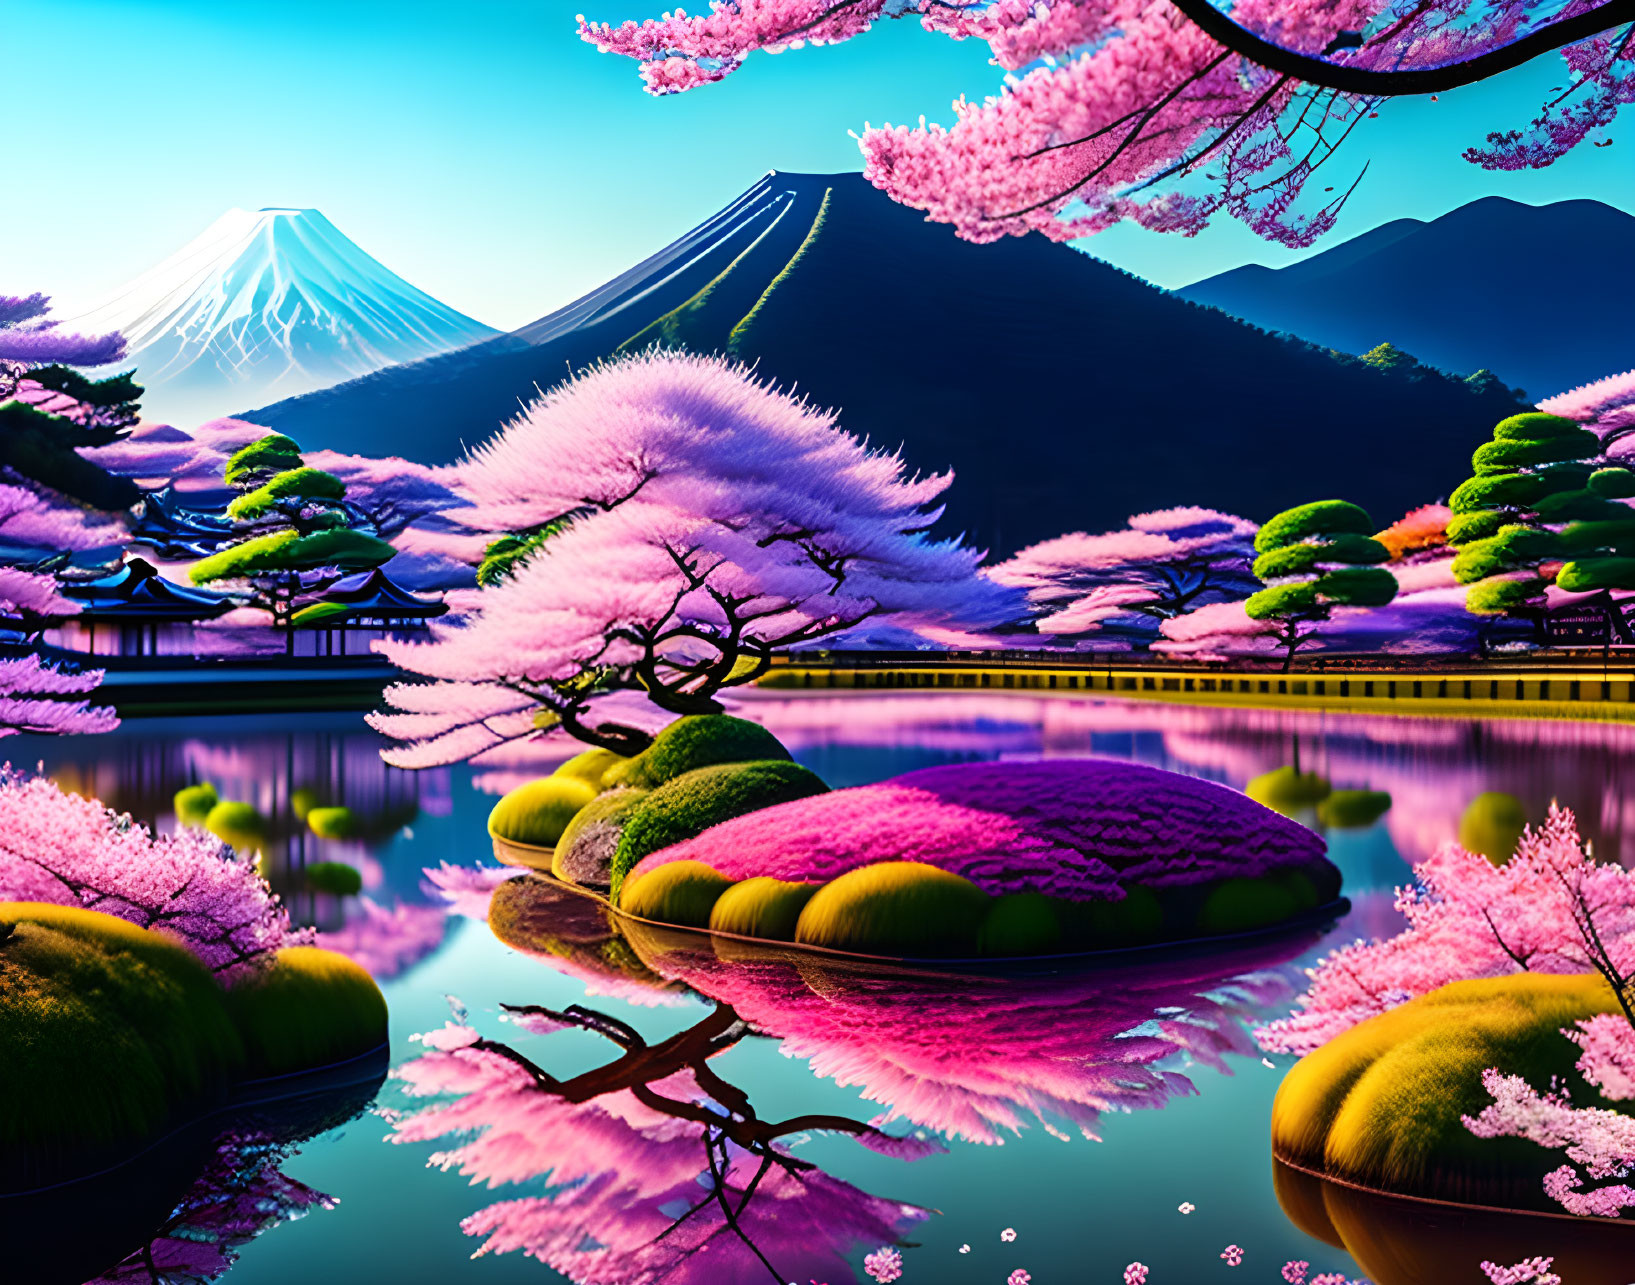 Tranquil pond with cherry blossoms, Mount Fuji, clear sky